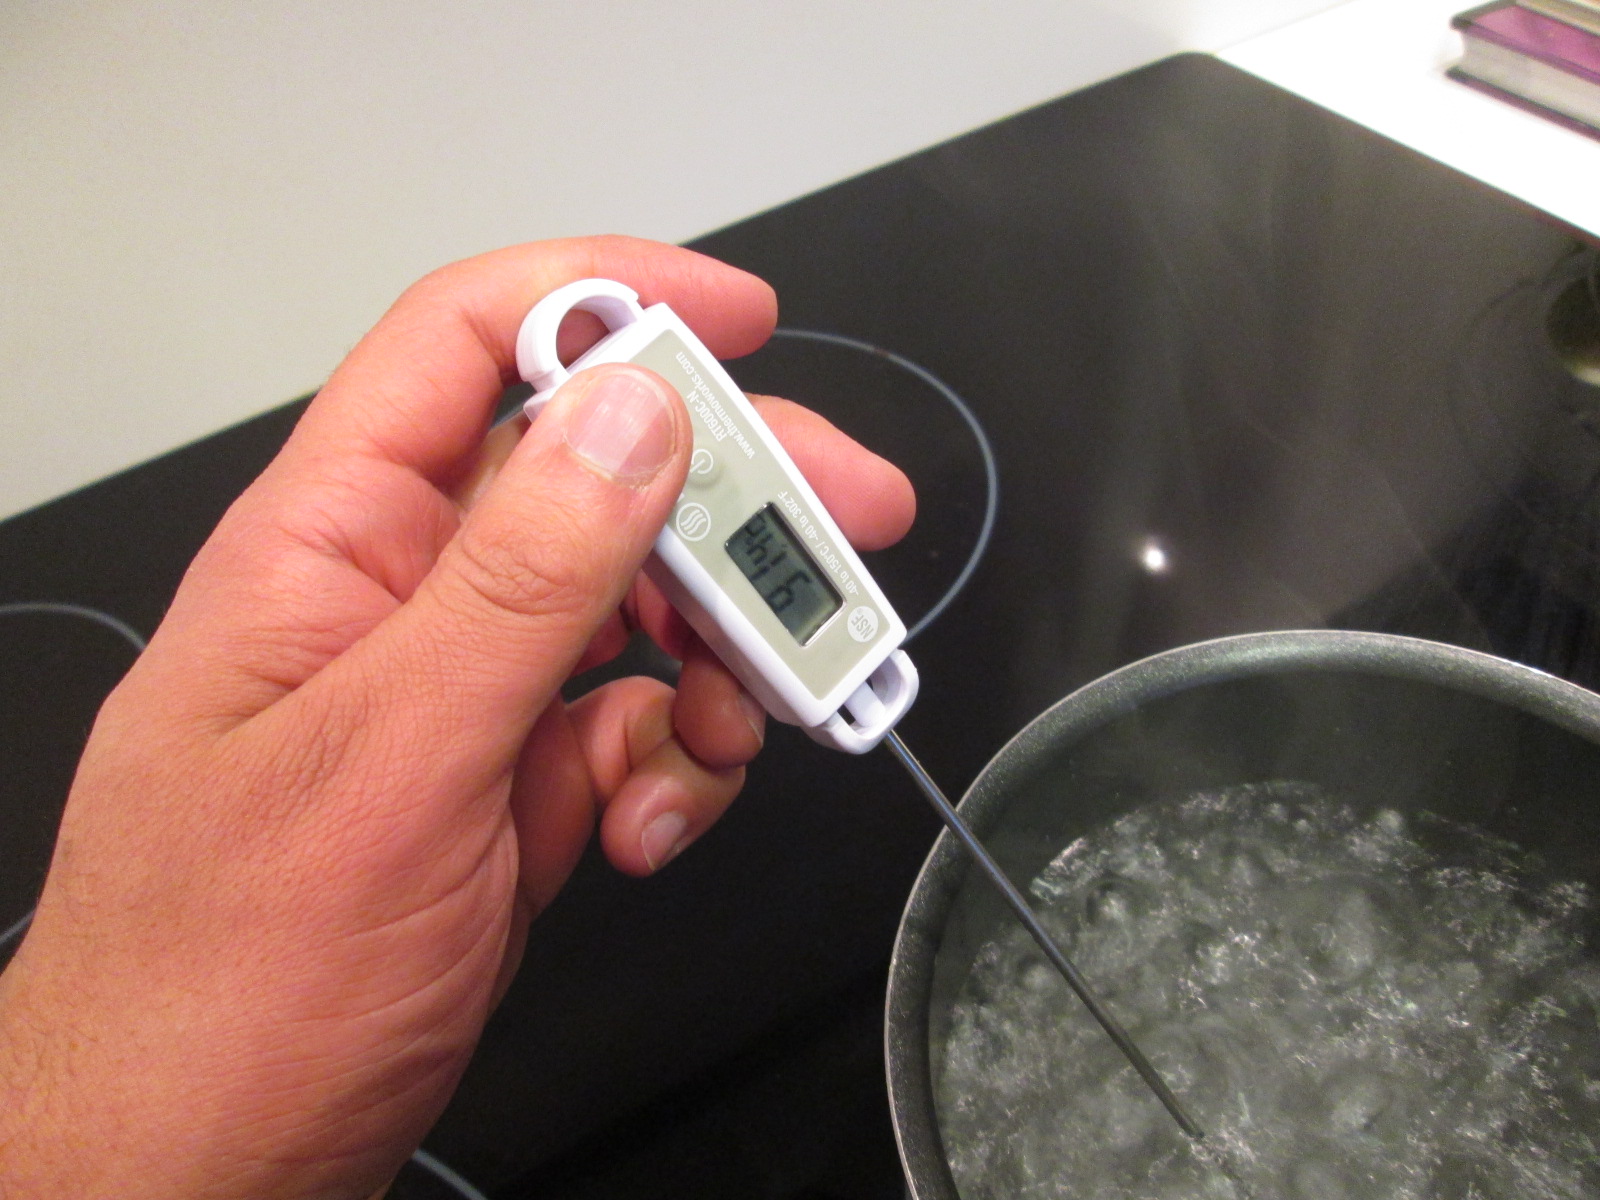 Does boil water temperature what How To